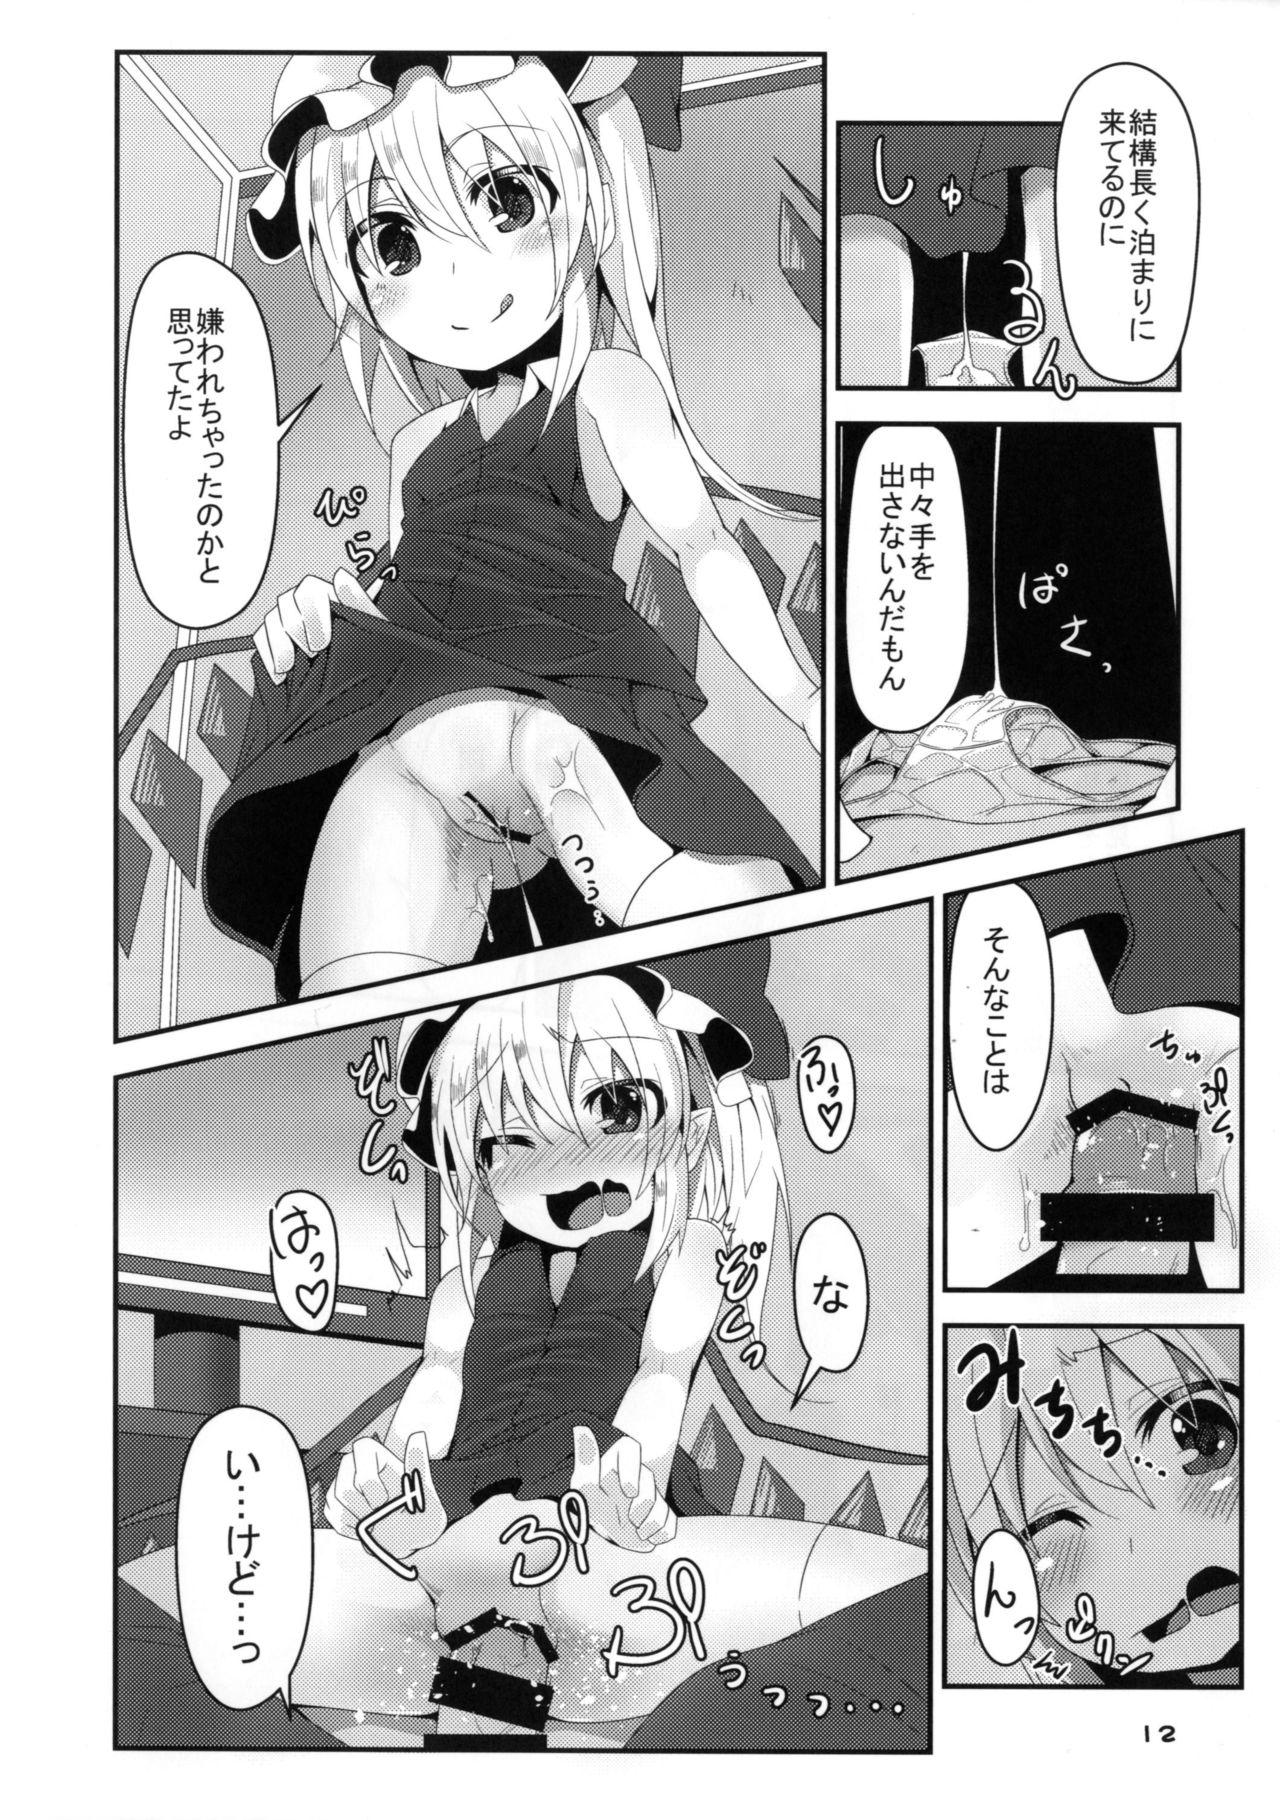 Teensex FLAN-CHAN COOL BIZ - Touhou project Party - Page 11